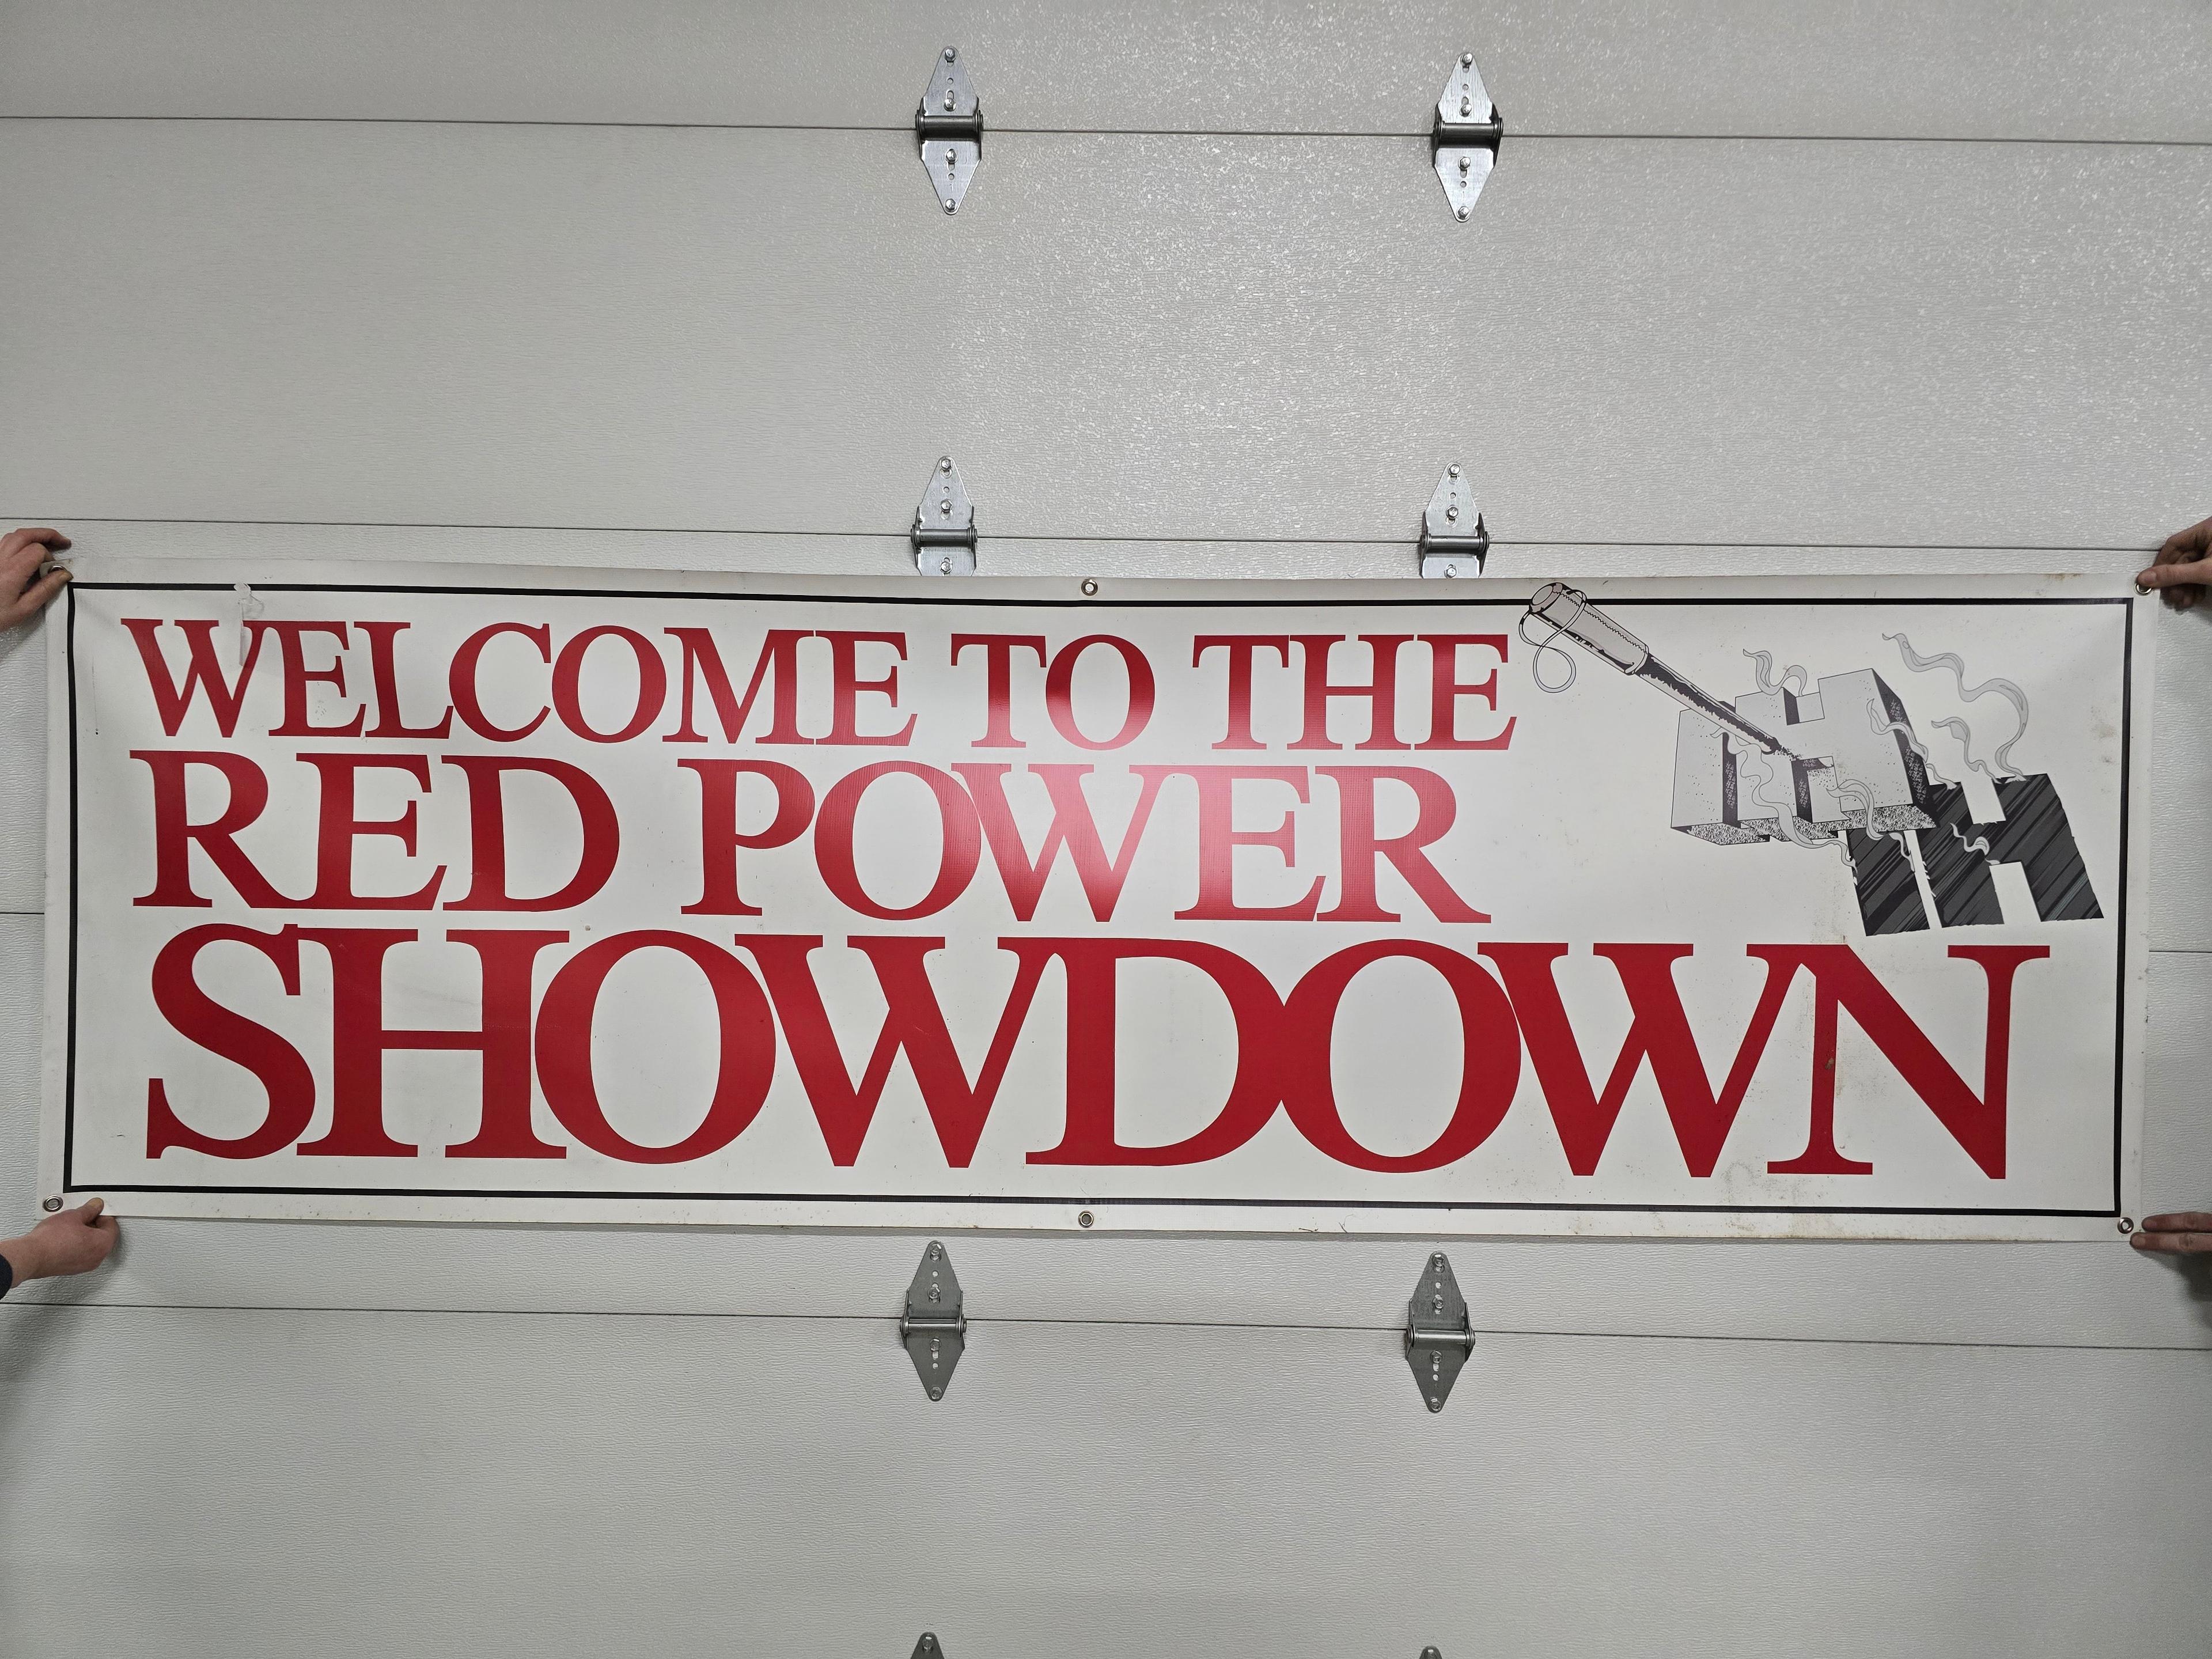 Welcome to the Red Power showdown banner